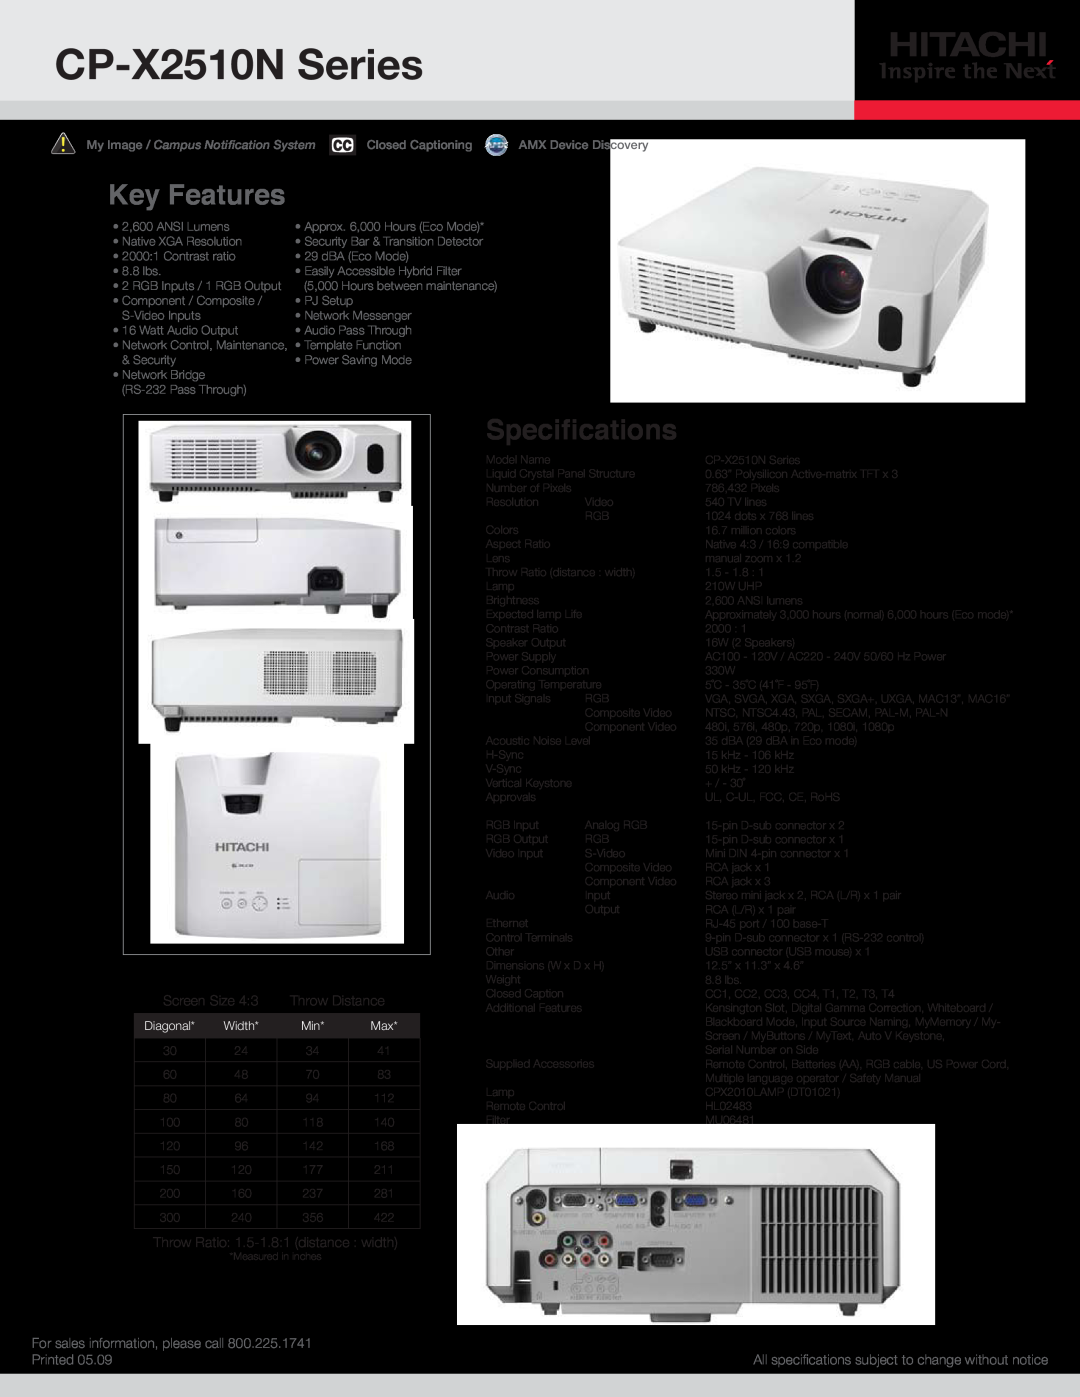 Hitachi specifications CP-X2510N Series, Key Features, Speciﬁcations, Screen Size, Throw Distance, Printed, Diagonal 